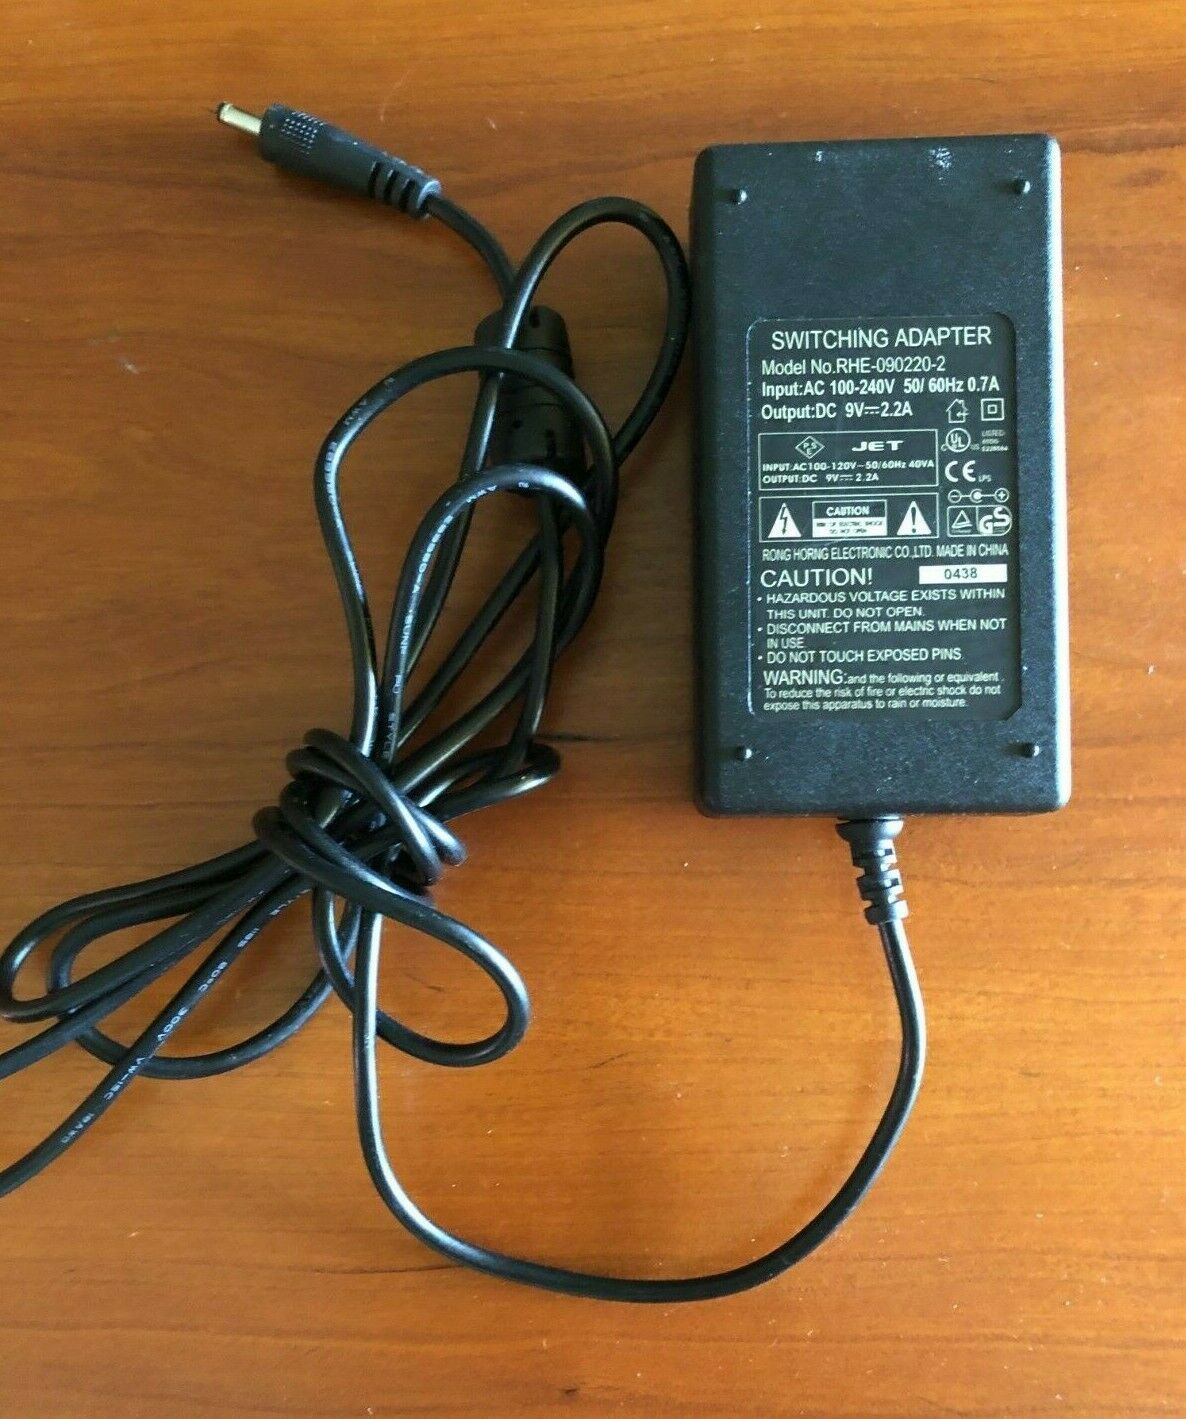 JET RHE-090220-2 Switching Power Supply Adapter 9V 2.2A Custom Bundle: No Output Voltage: 9V Type: Adapter Brand: JET